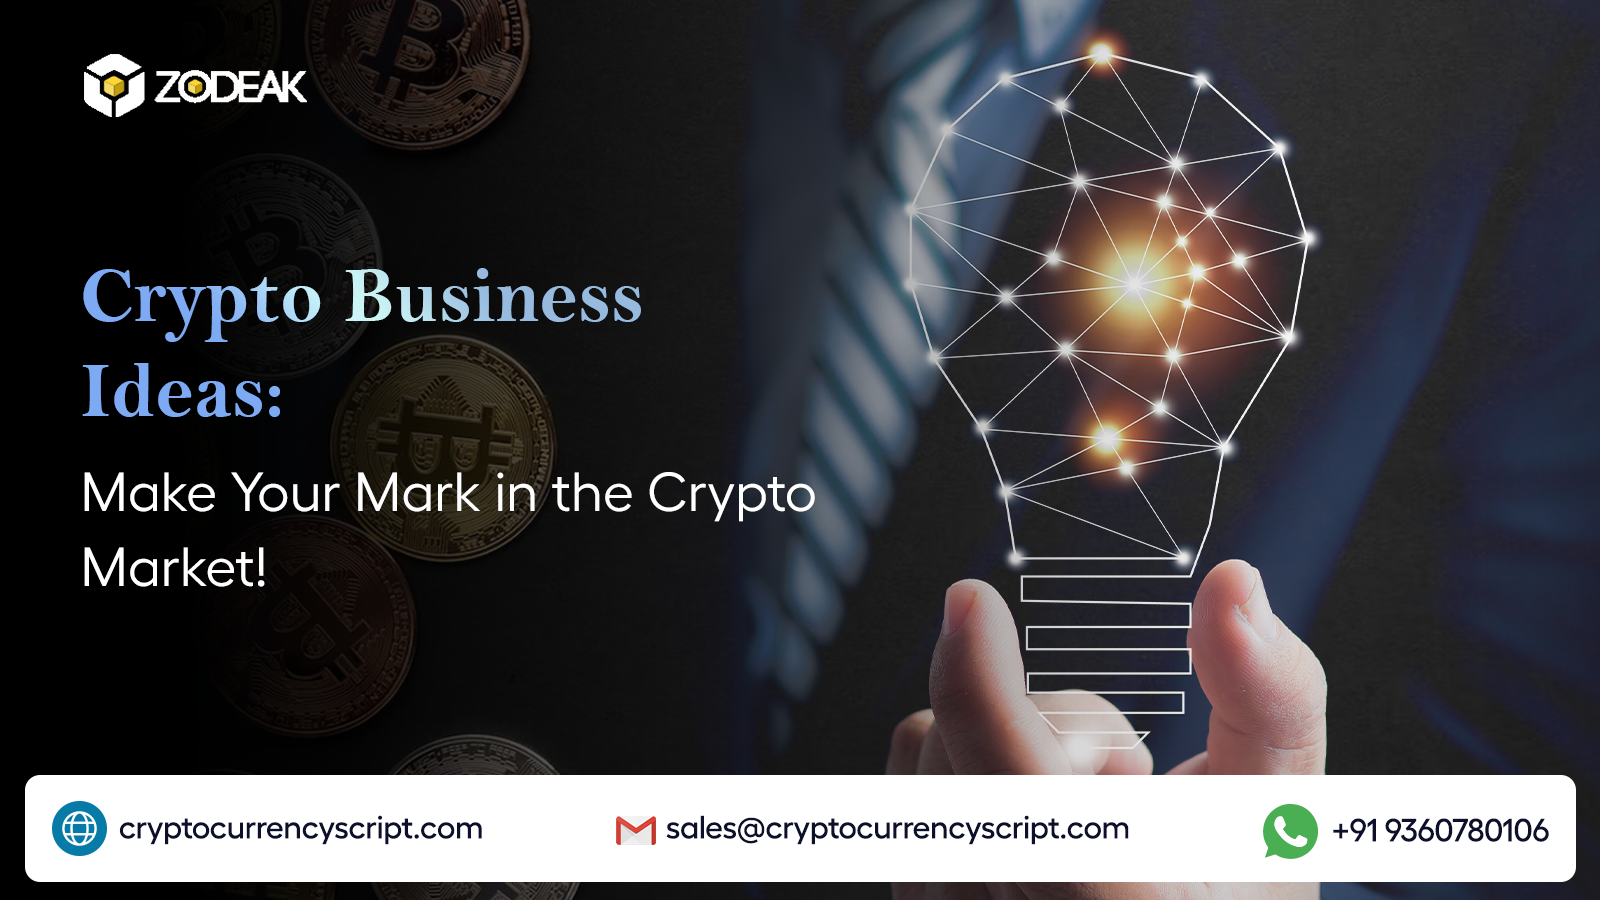 Crypto Business Ideas: Make Your Mark in the Crypto Market!